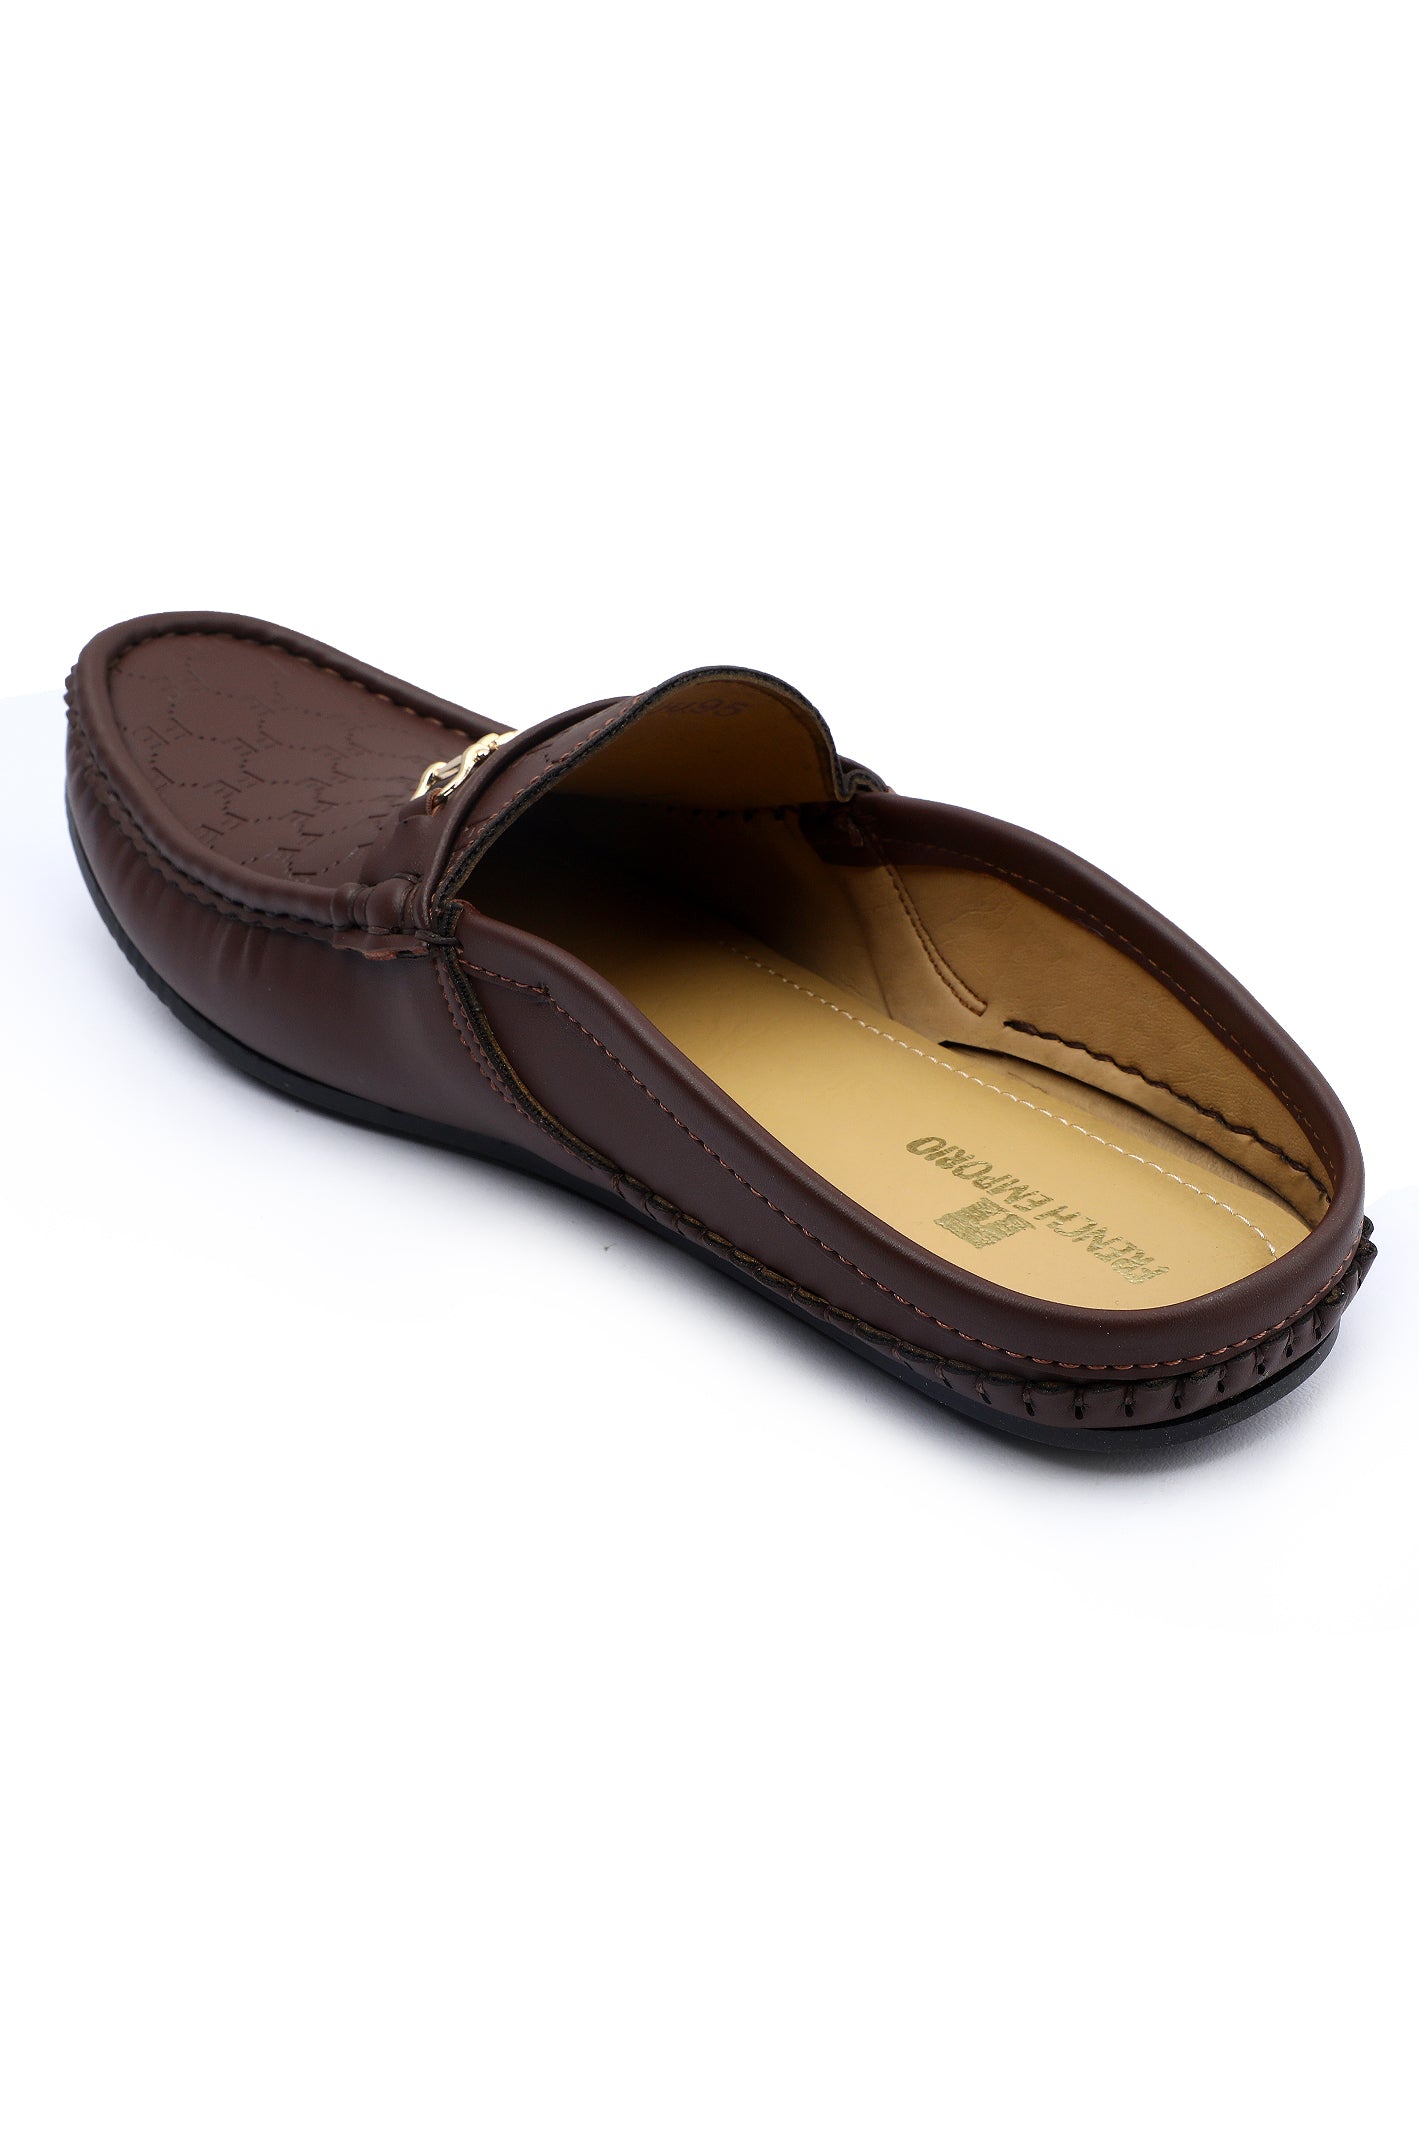 Casual Mule Shoes For Men SKU: SMC-0095-BROWN - Diners